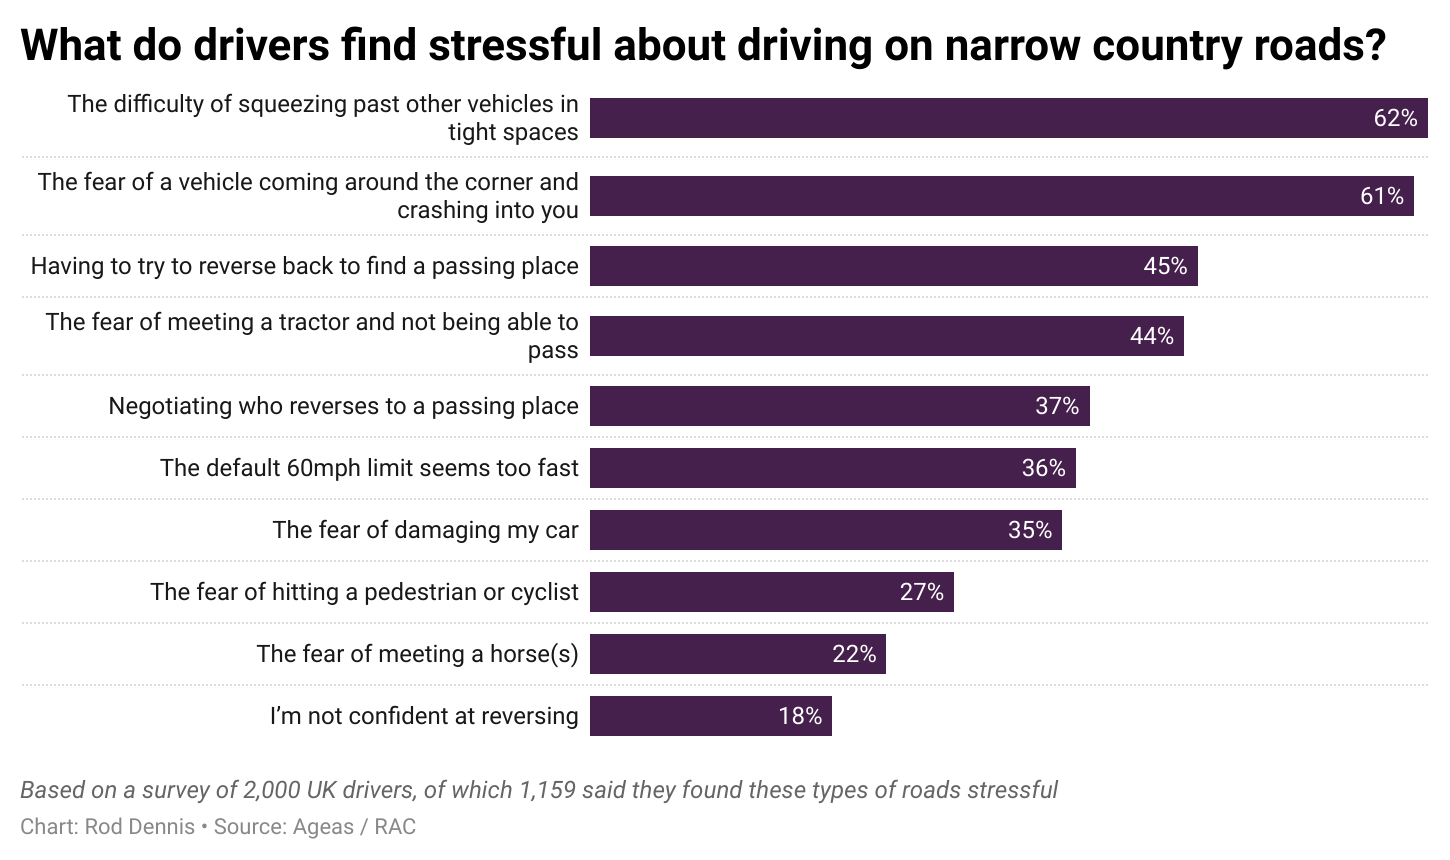 what do RAC drivers find most stressful